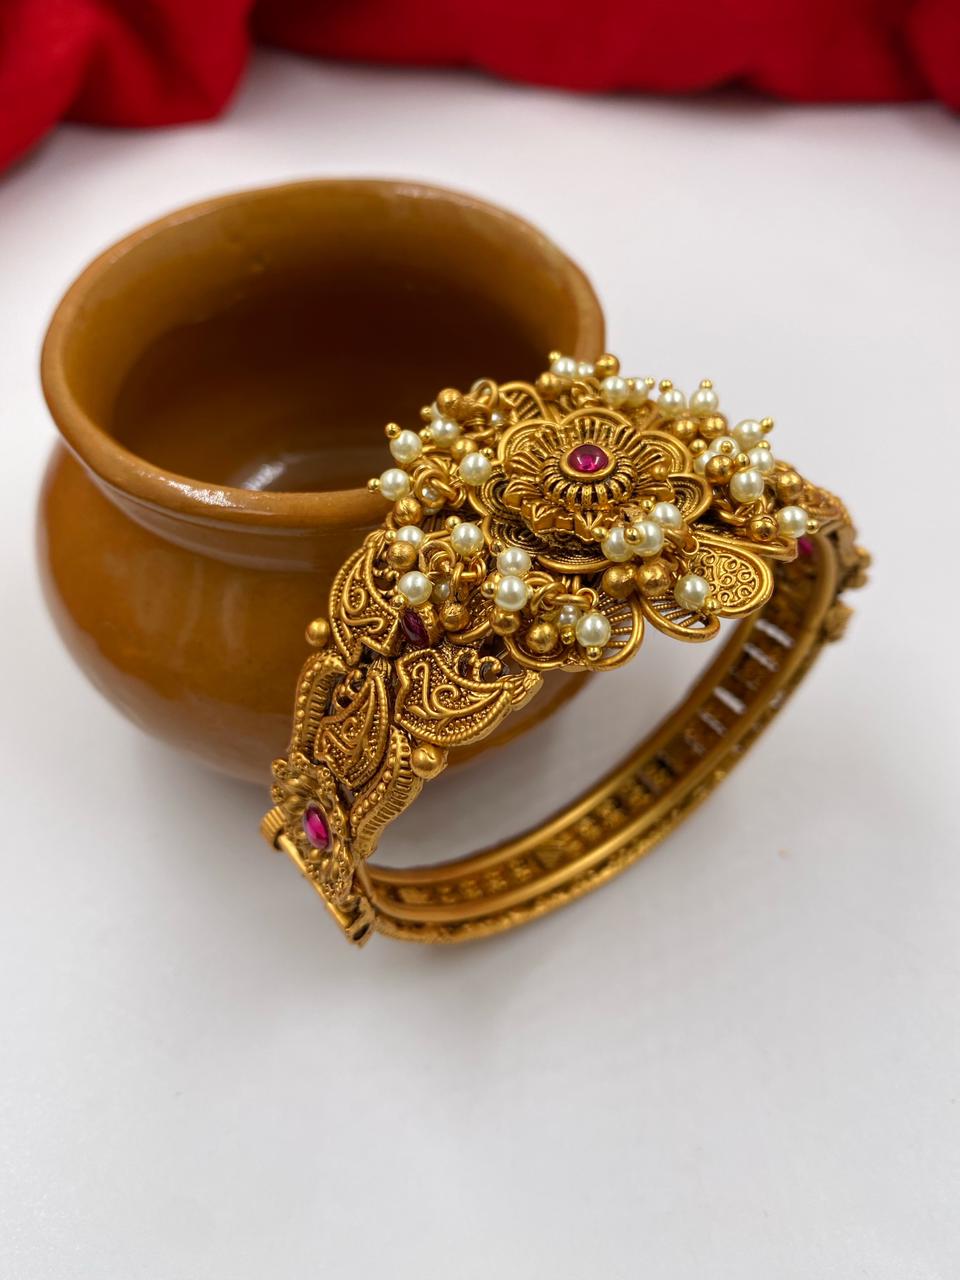 Delicate Leaf Winding Tanishq Antique Gold Bangles Bracelet For Women  Copper Yellow Gold Filled Round Stick Opening Perfect For Bridal Wedding  Party Jewelry From Bellakim, $12.74 | DHgate.Com